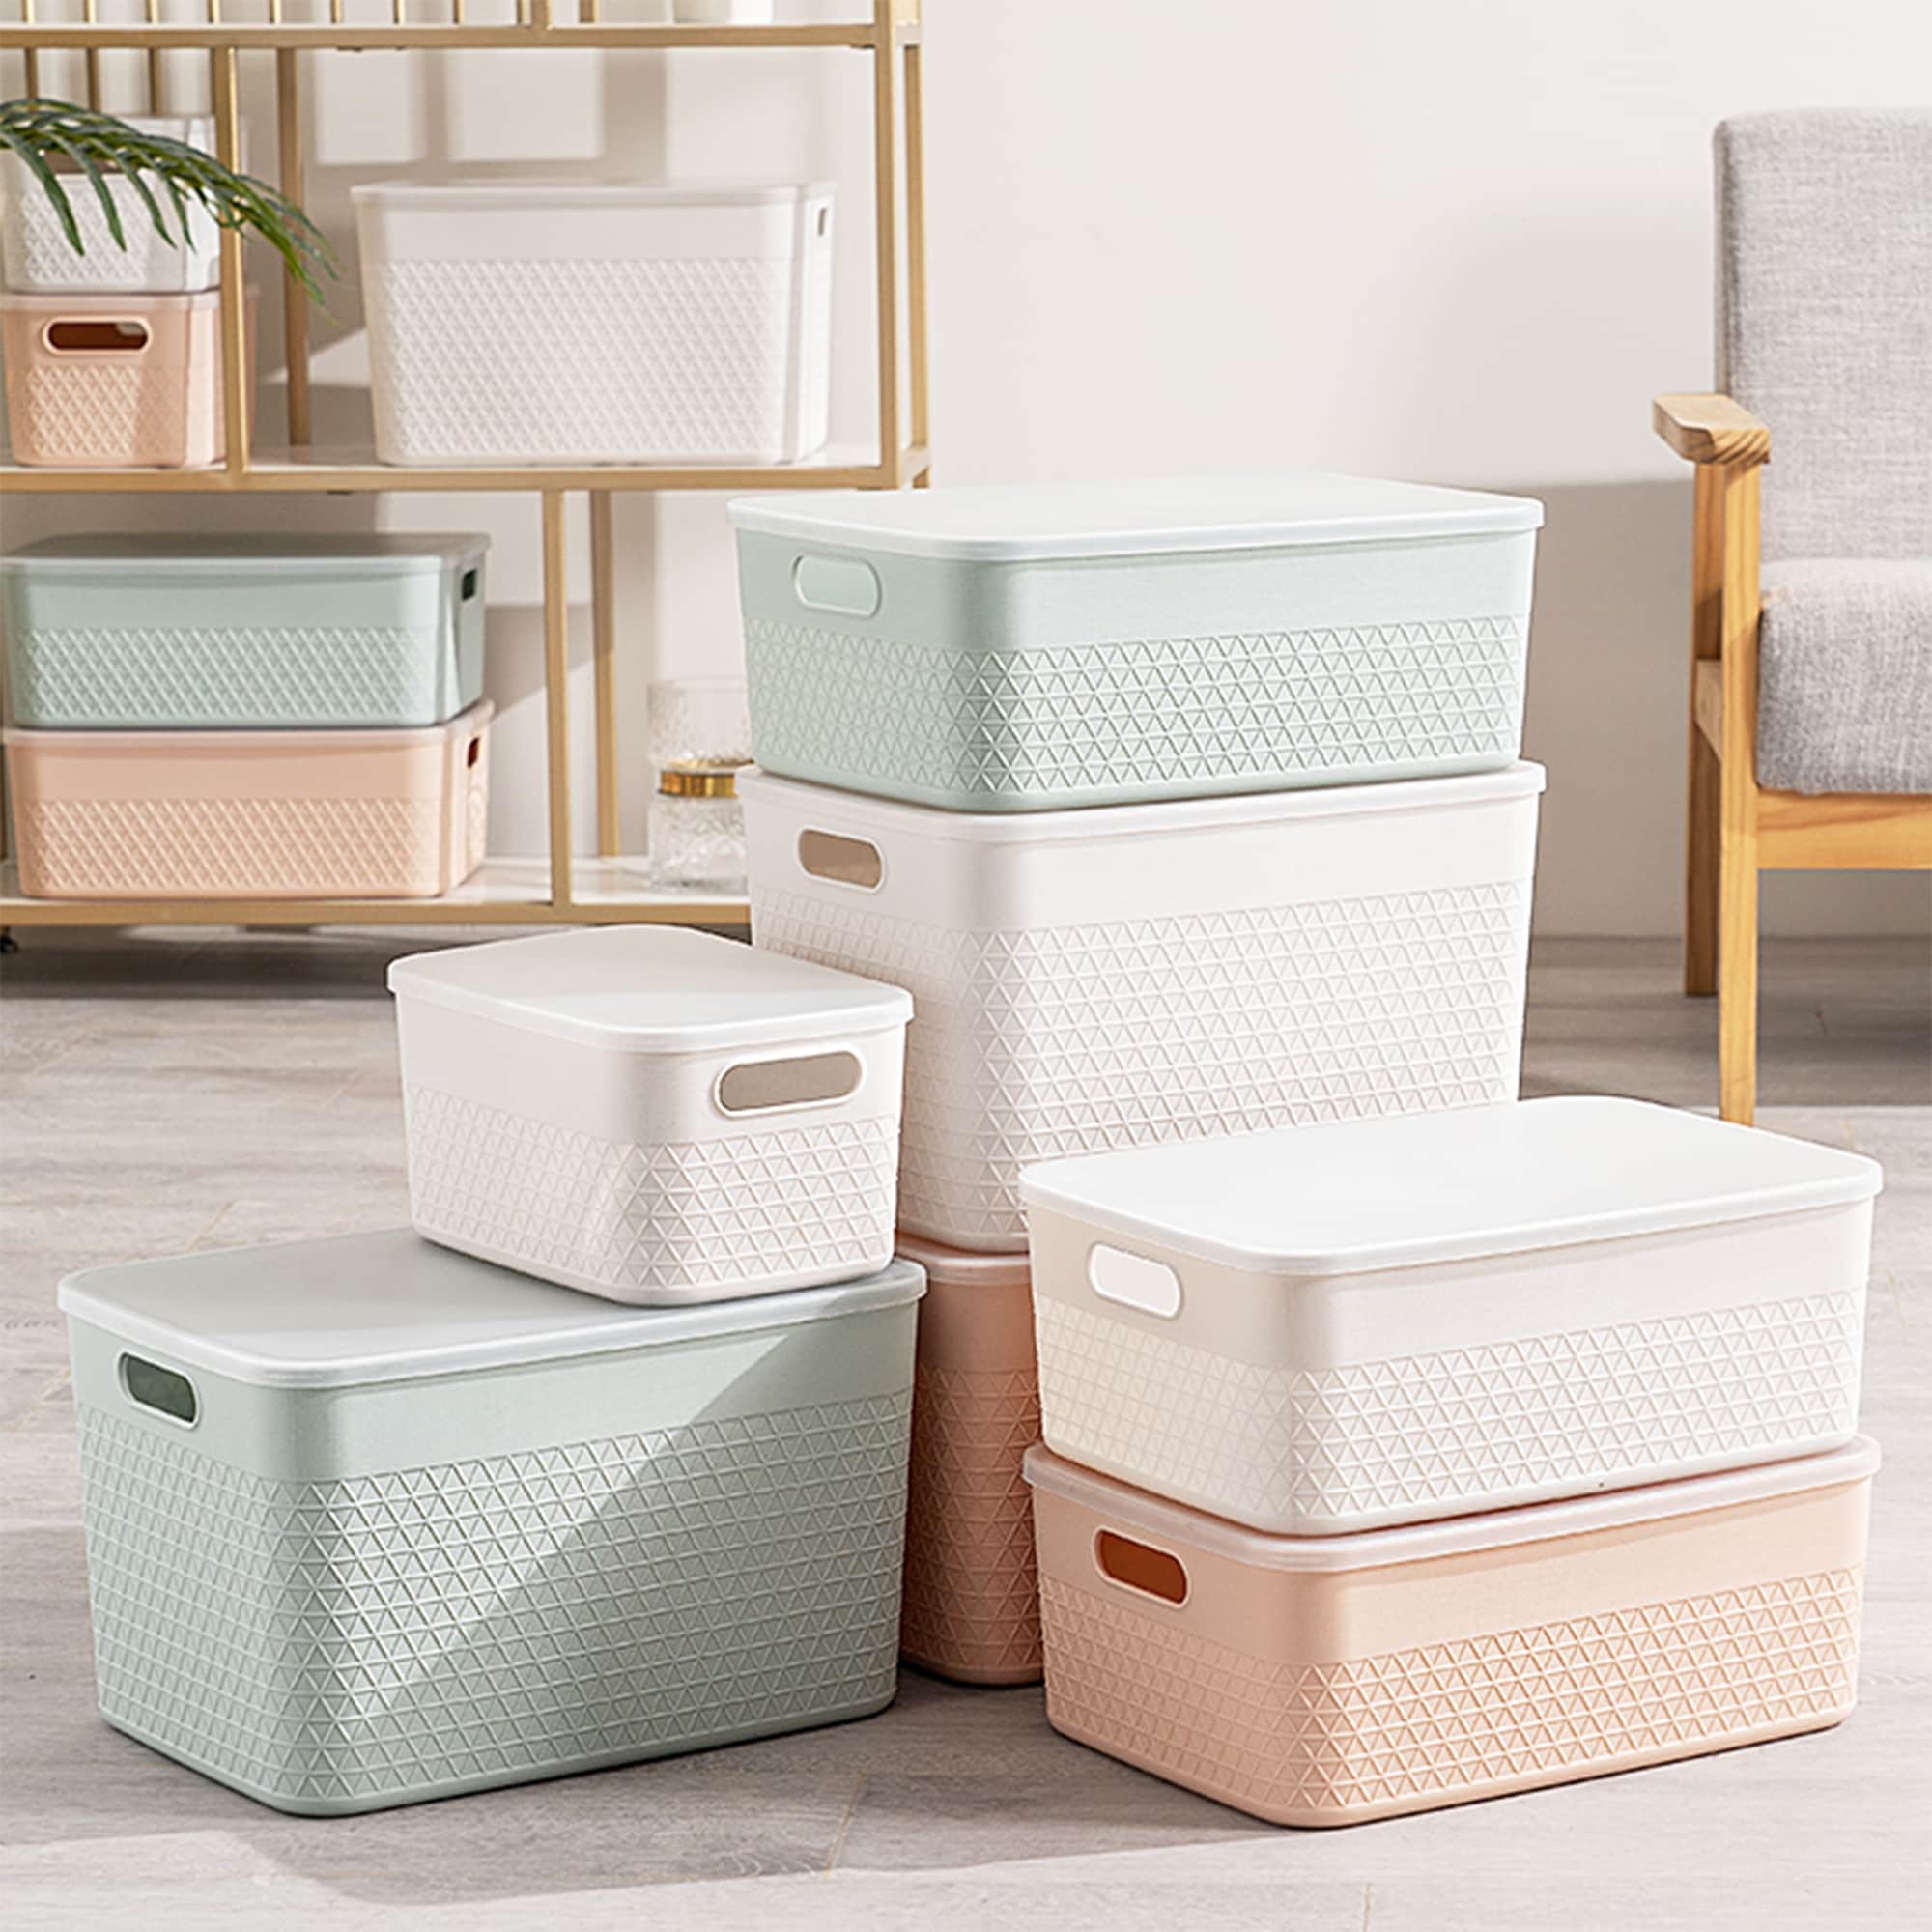 https://ak1.ostkcdn.com/images/products/is/images/direct/907c06ee612d72f70b3a5ee70628aa827678e30b/HANAMYA-Lidded-Storage-Bin-Organizer-%7C-Storage-Organizing-Container%2C-Set-of-6.jpg